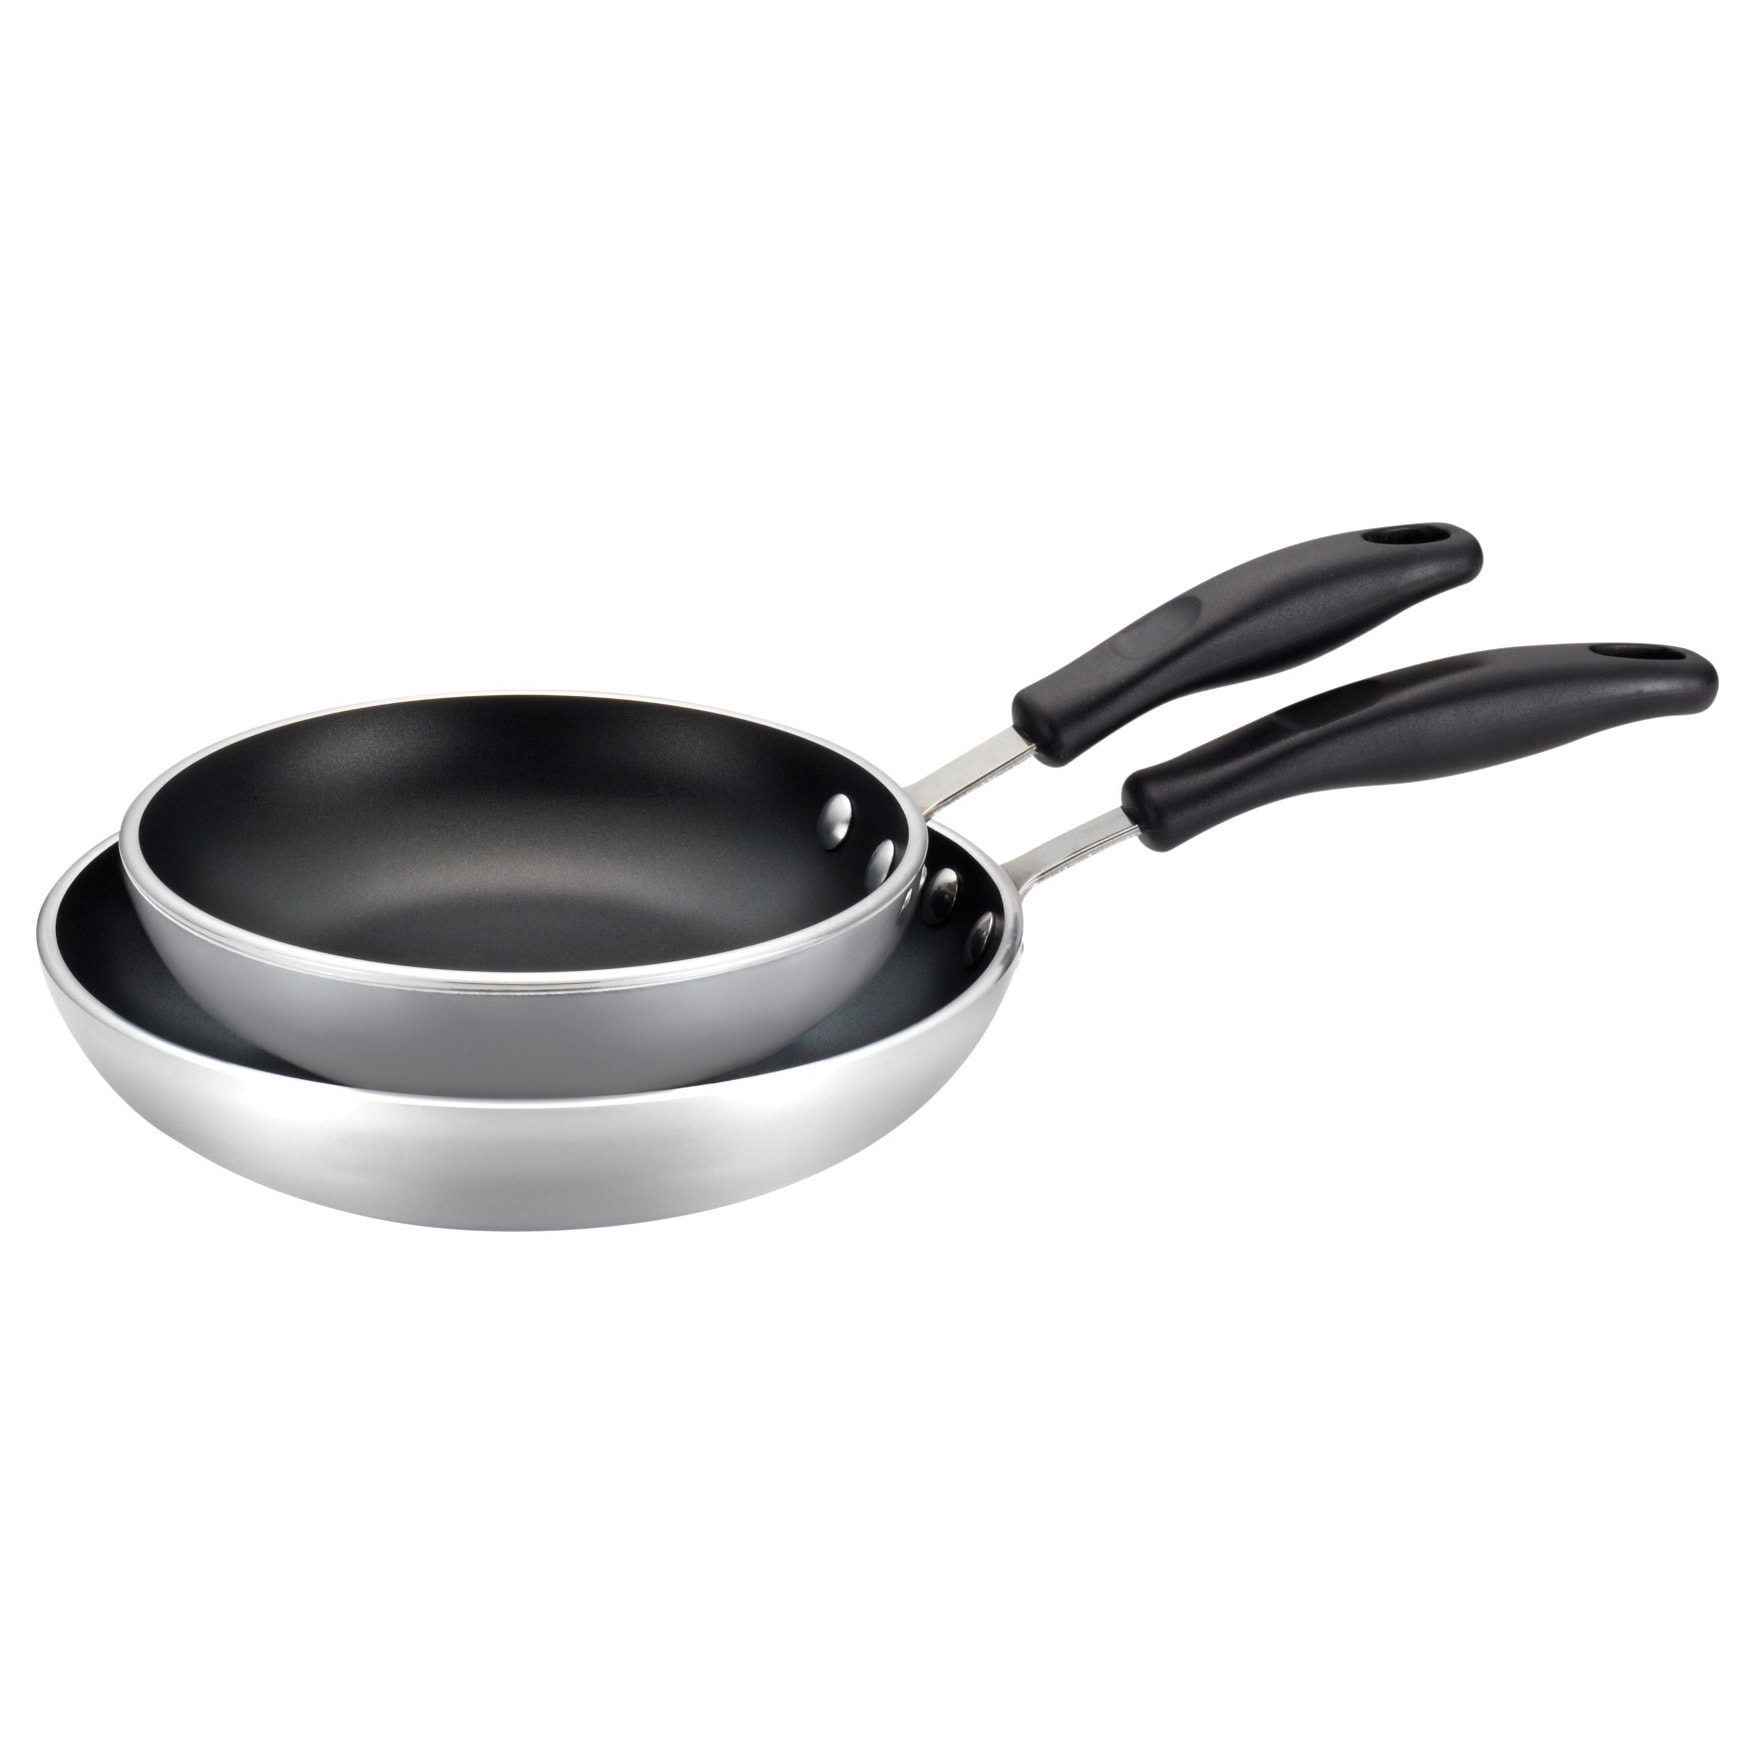 https://ak1.ostkcdn.com/images/products/8875045/Farberware-Aluminum-Commercial-Cookware-Twin-Pack-8.25-inch-and-10-inch-Open-Skillets-L16099625.jpg